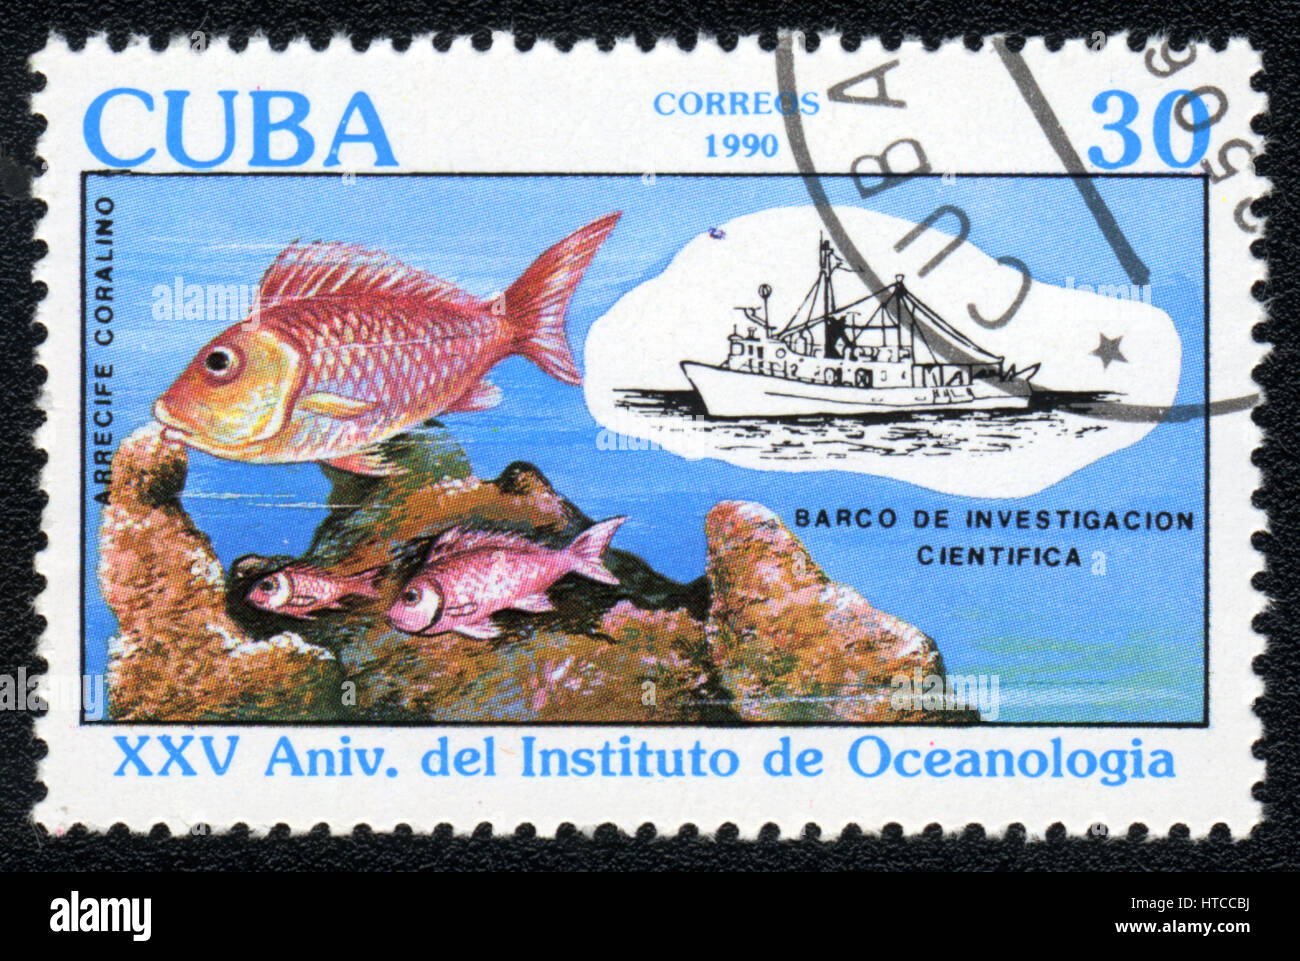 A postage stamp printed in Cuba shows image of a Coral reef (25 th anniversary of the Institute of Oceanology), 1990 Stock Photo